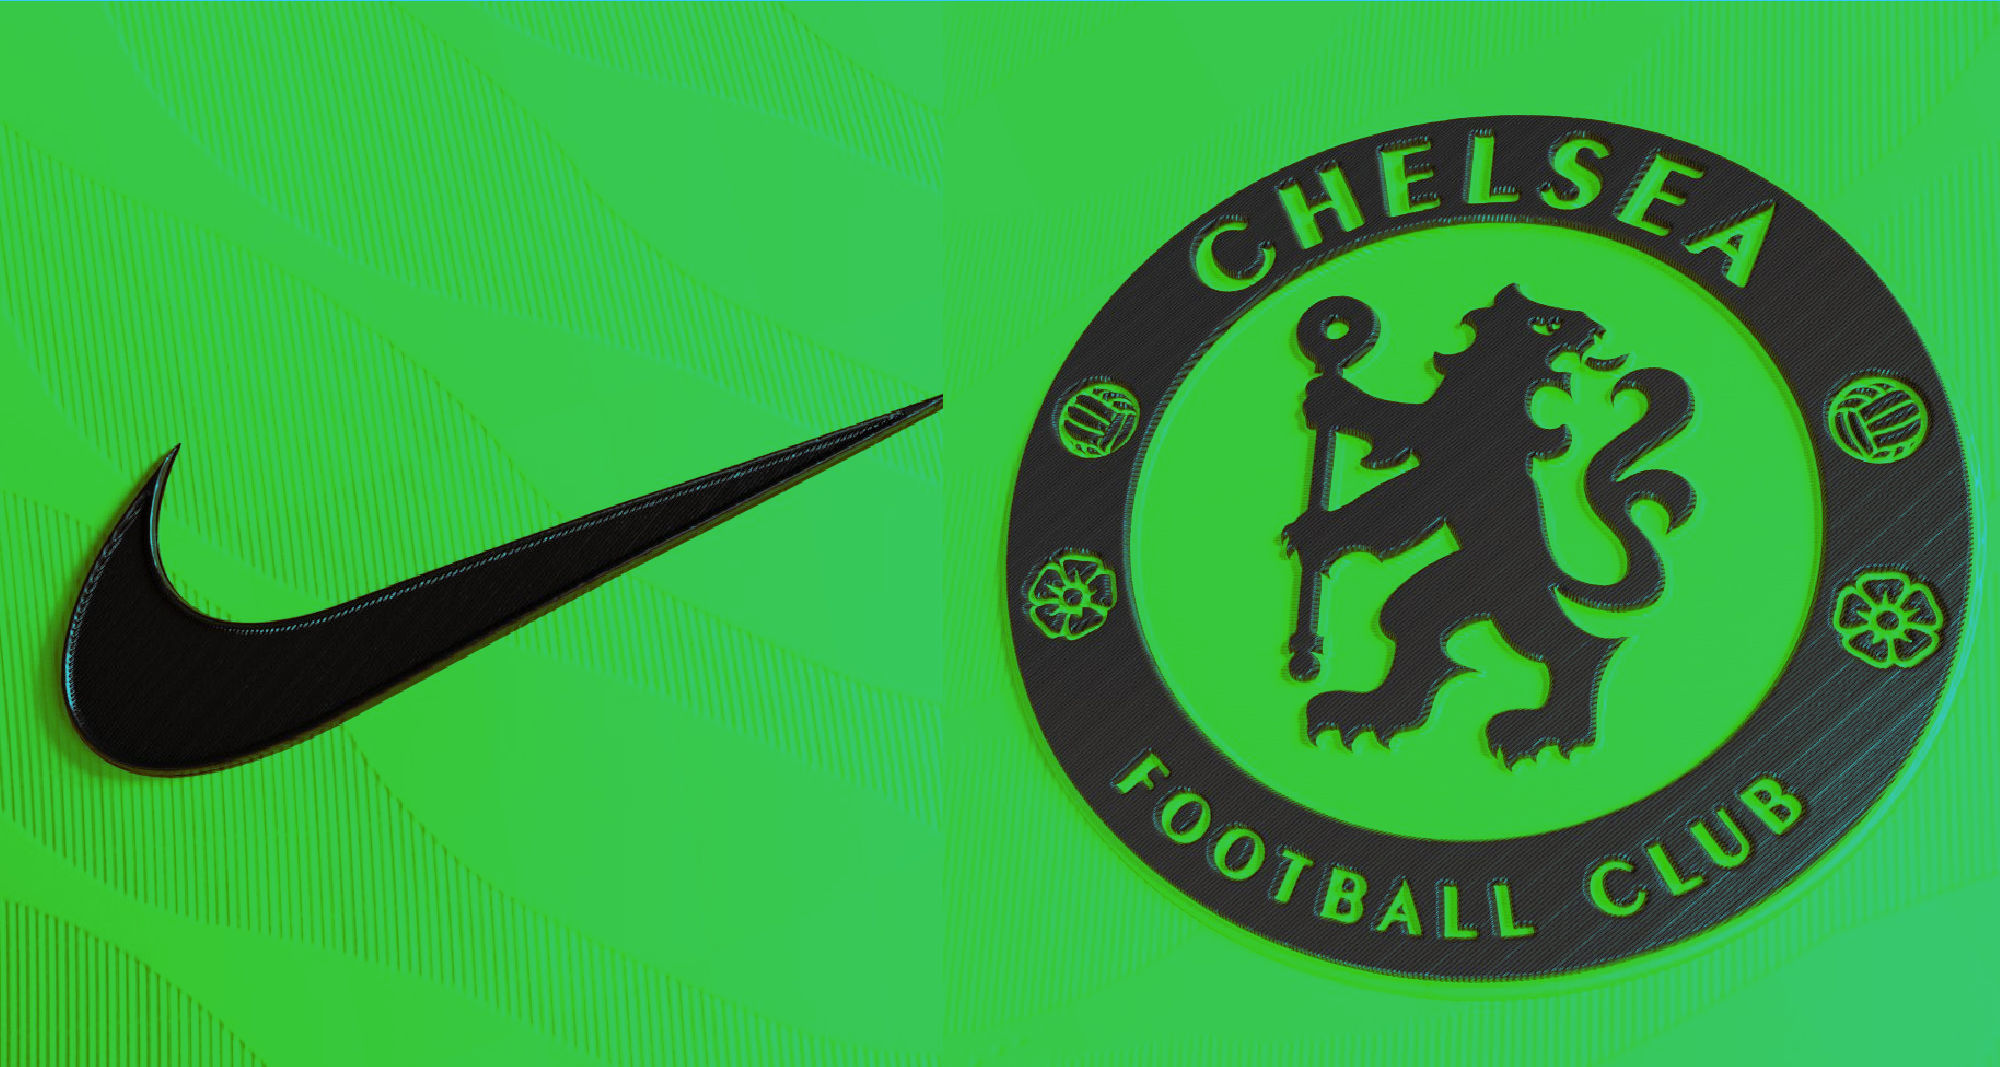 New leak shows the truly despicable nature of 21/22 Chelsea home kit